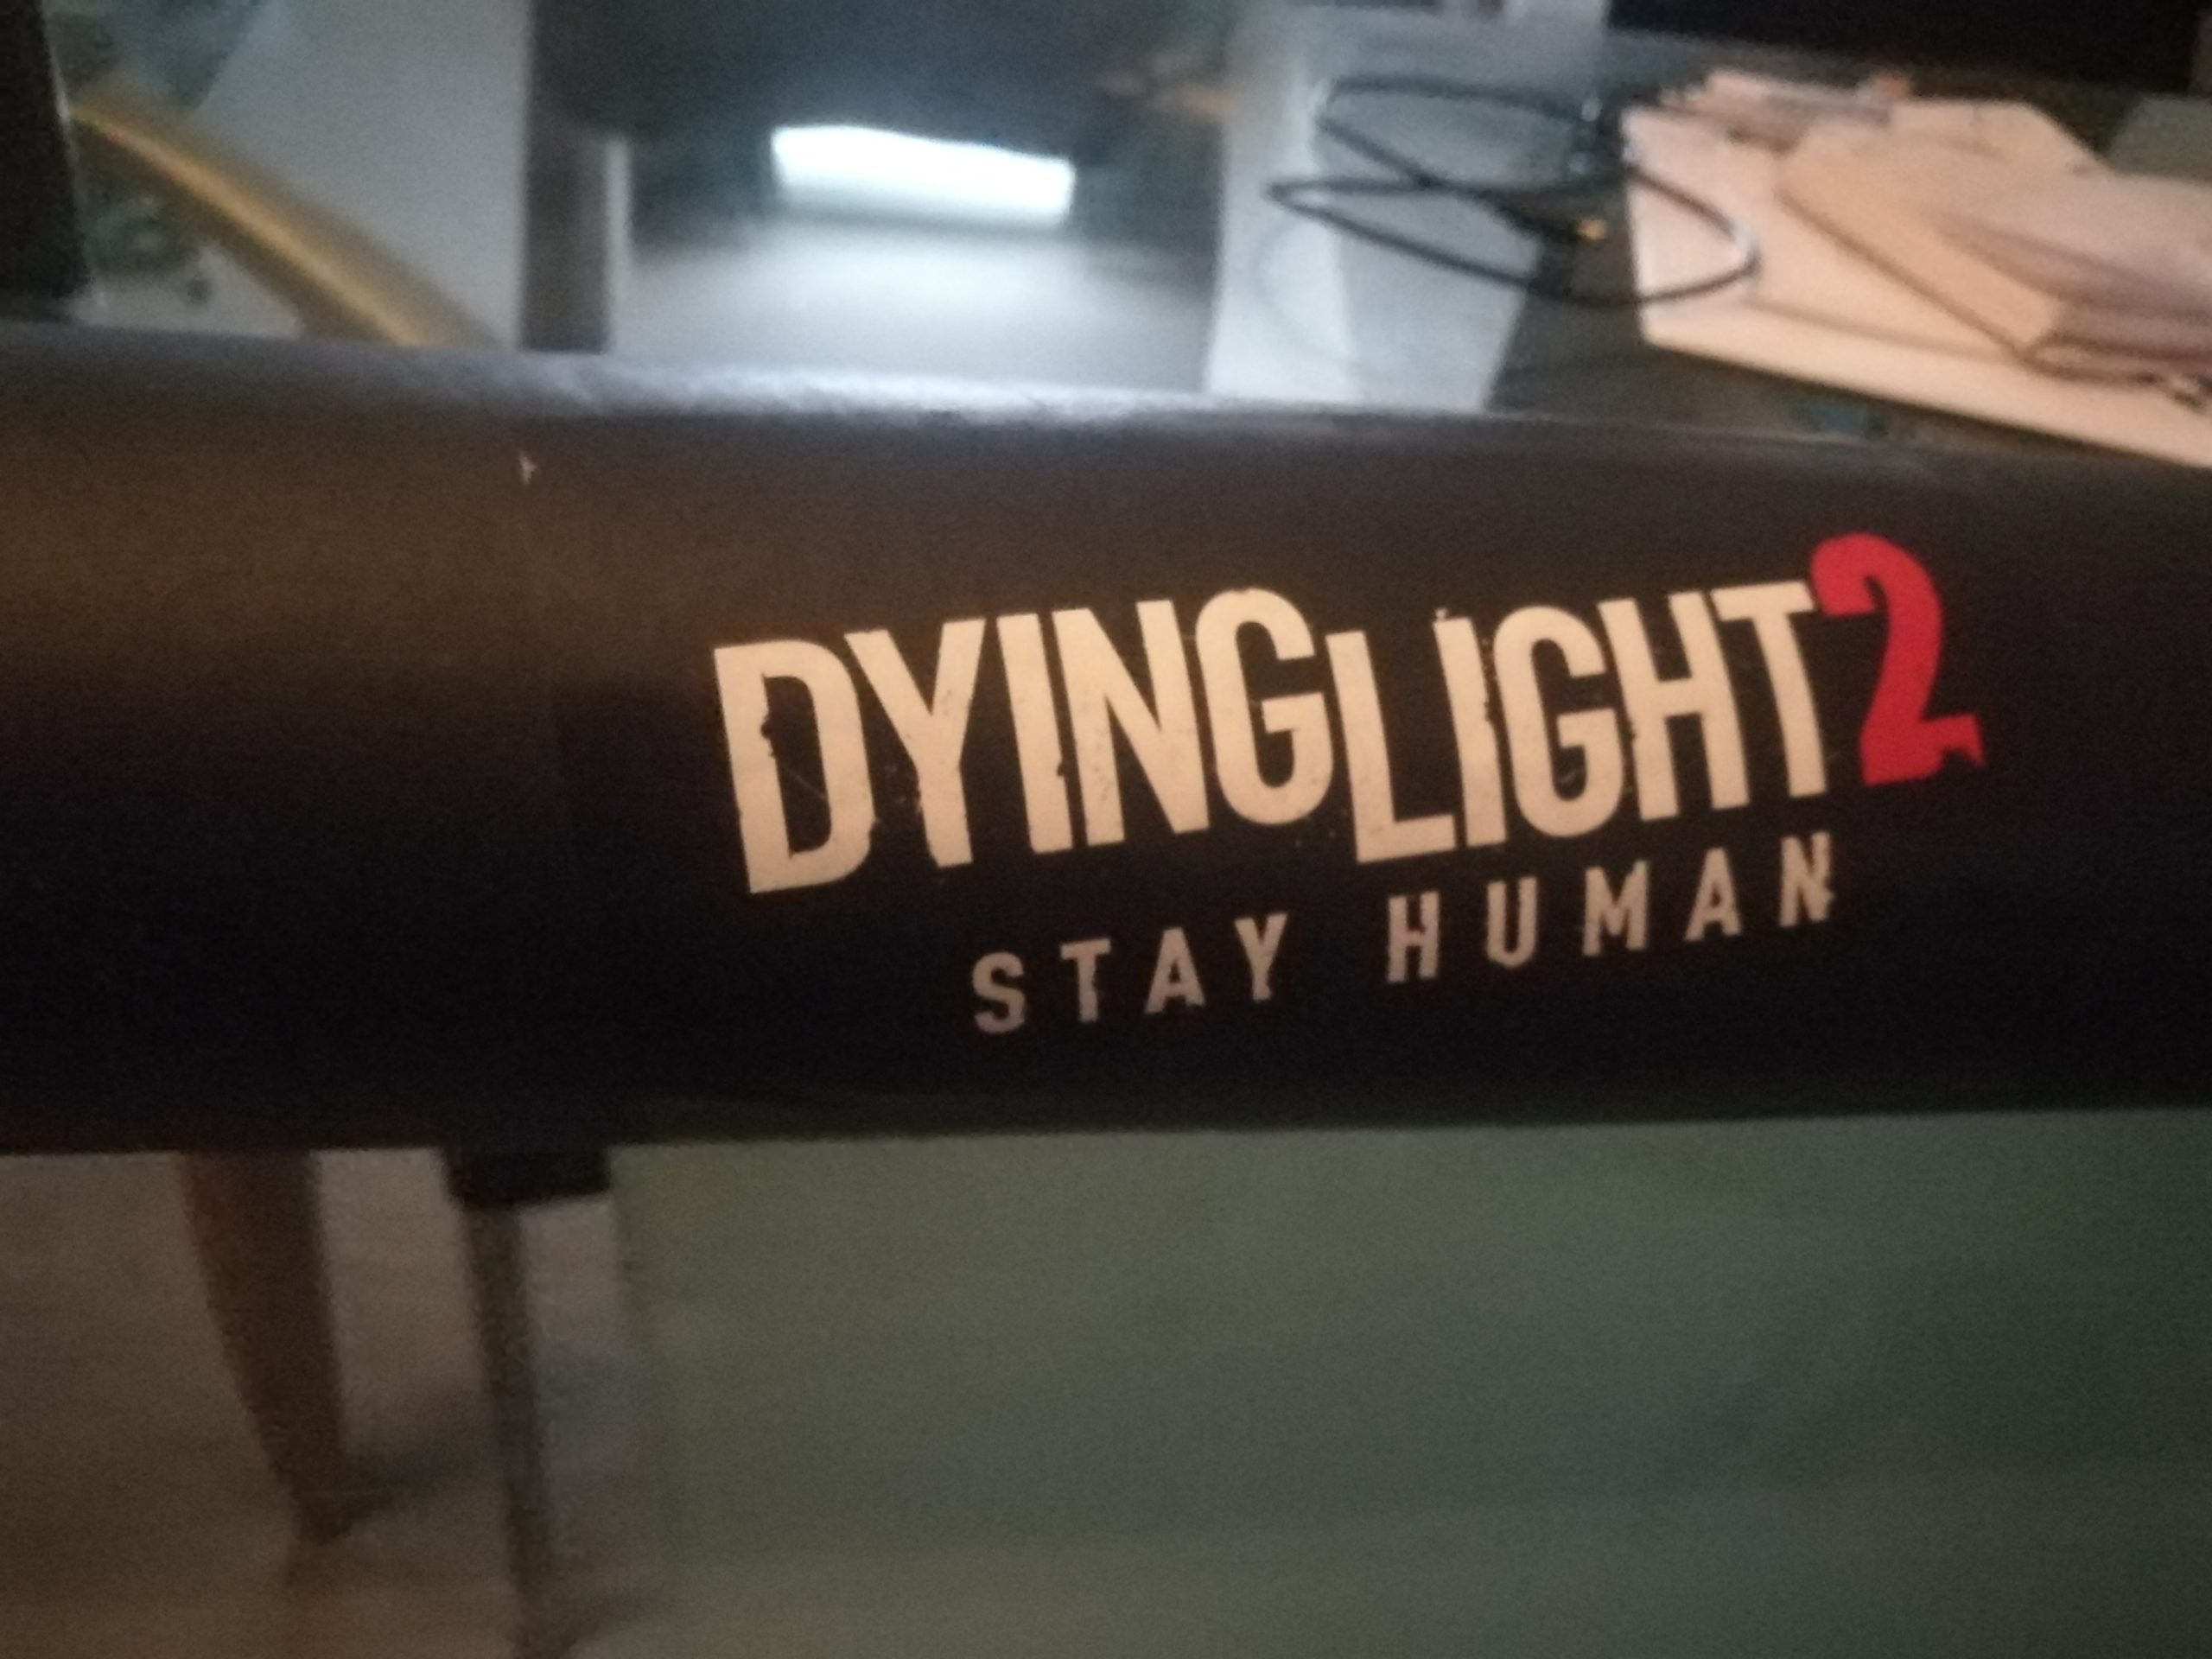 Mysterious package hints at Dying Light 2 reveal